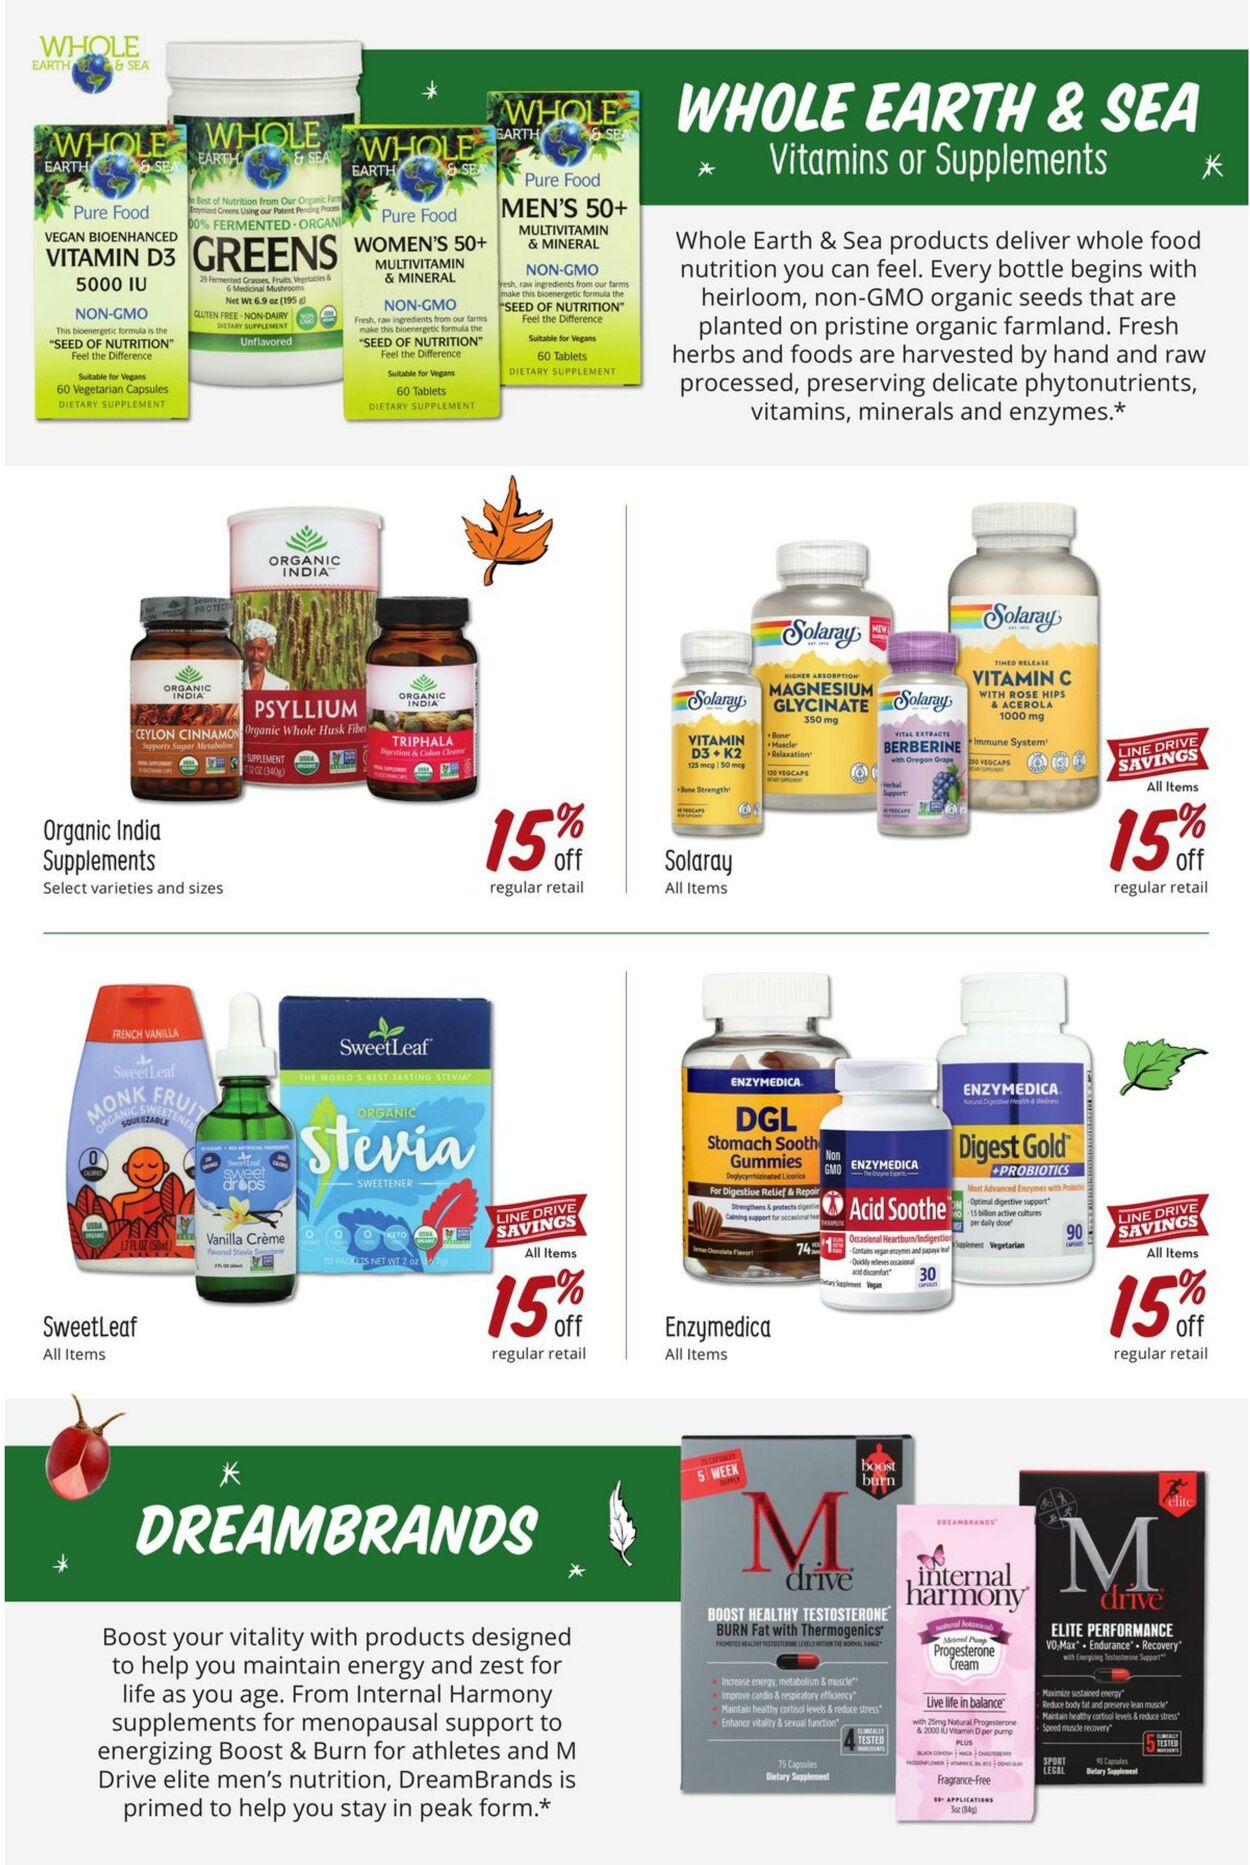 Weekly ad Sprouts 10/26/2022 - 11/29/2022